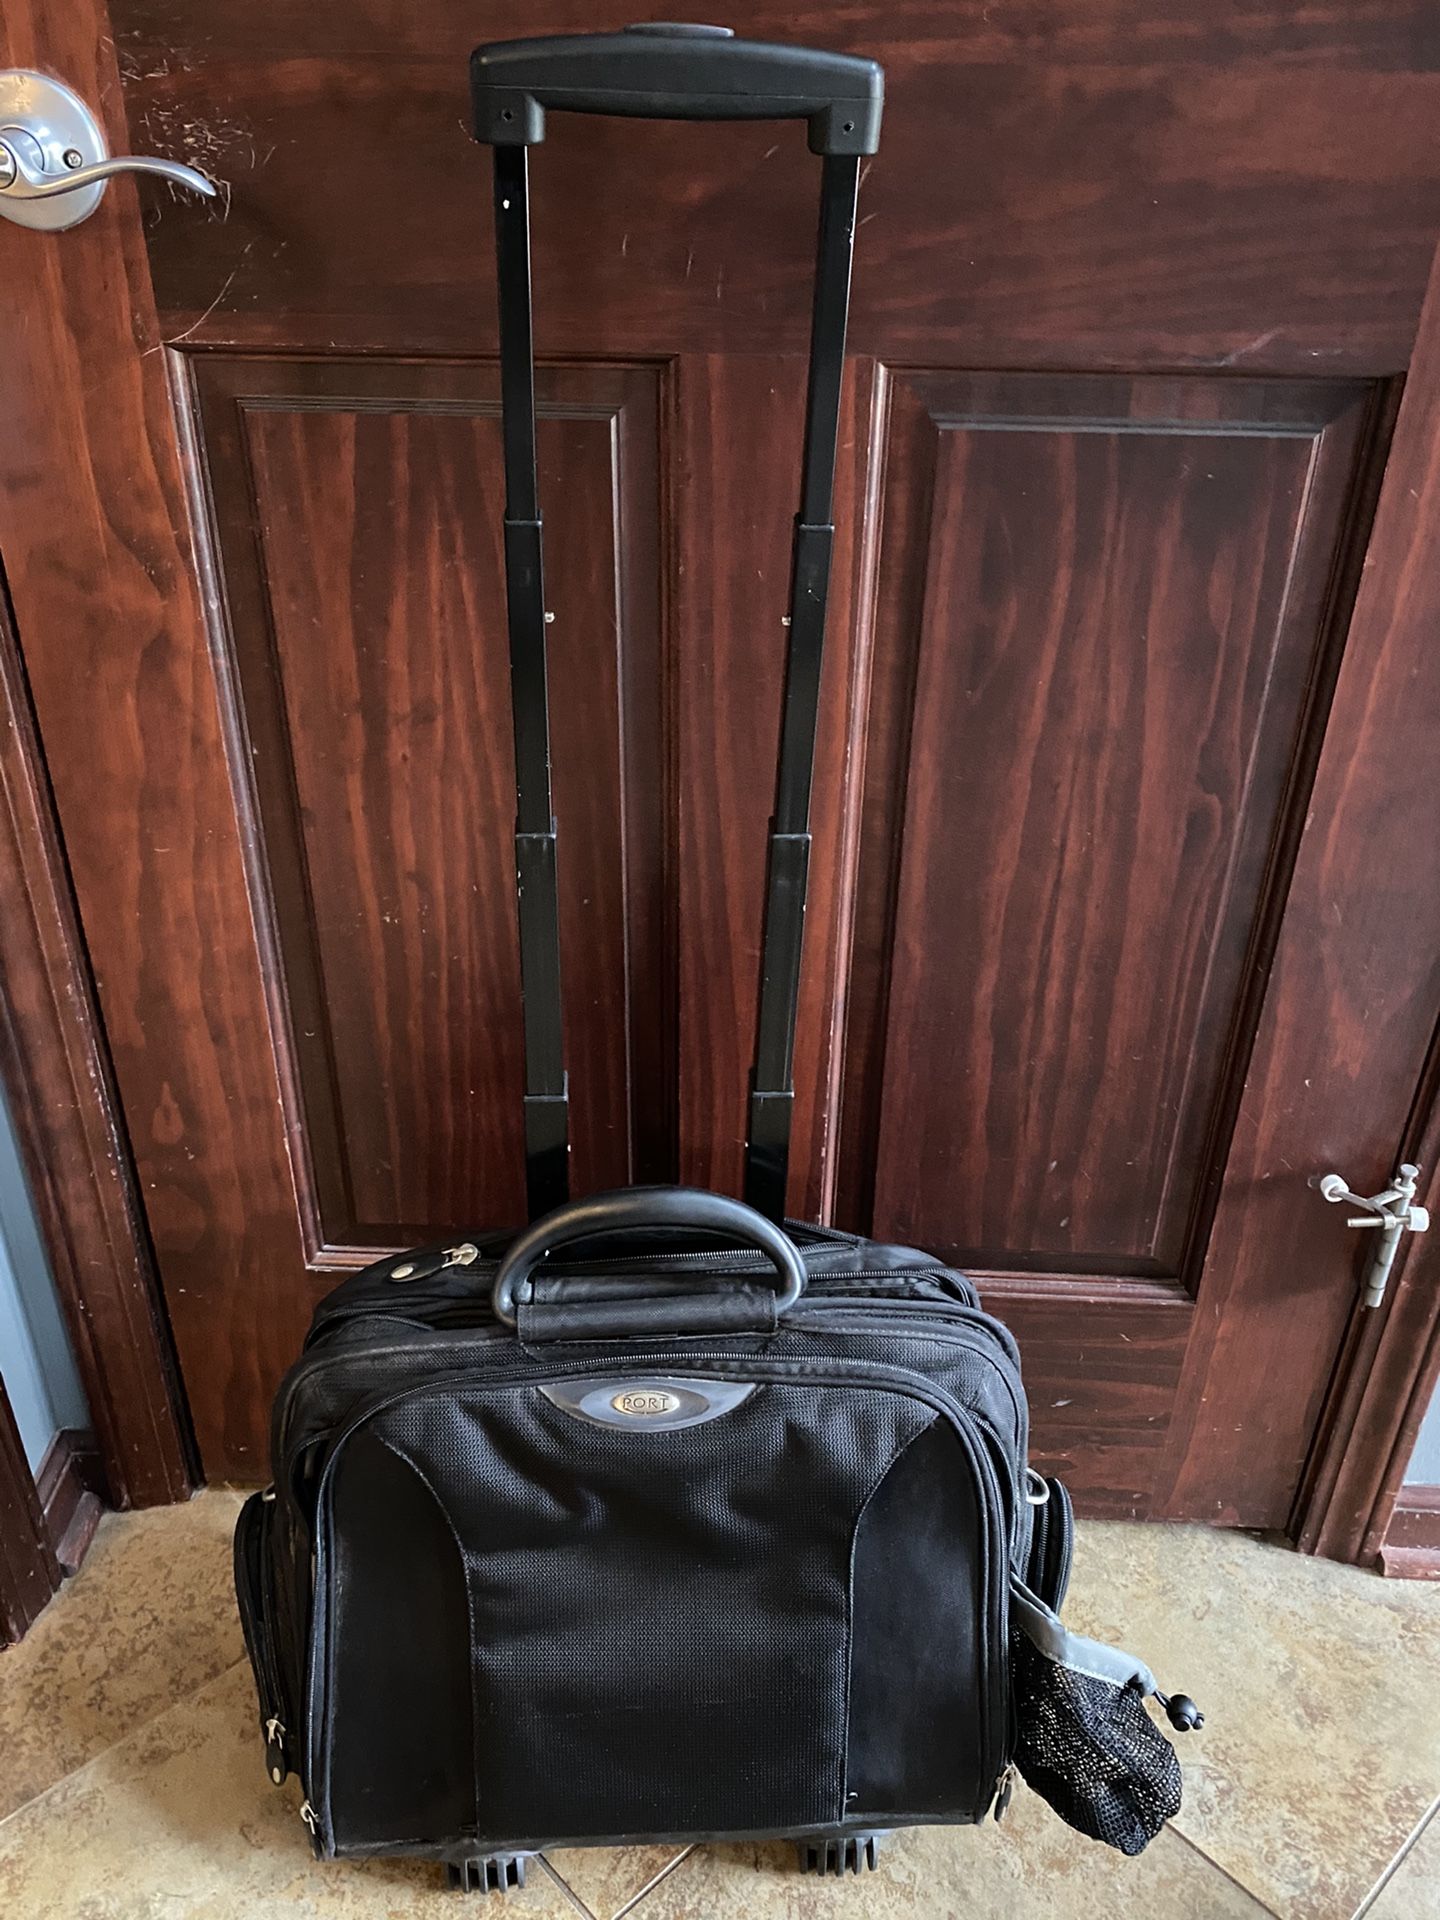 Port computer bag, retractable handle, Carry strap, many pockets, padding, roller wheels, etc.